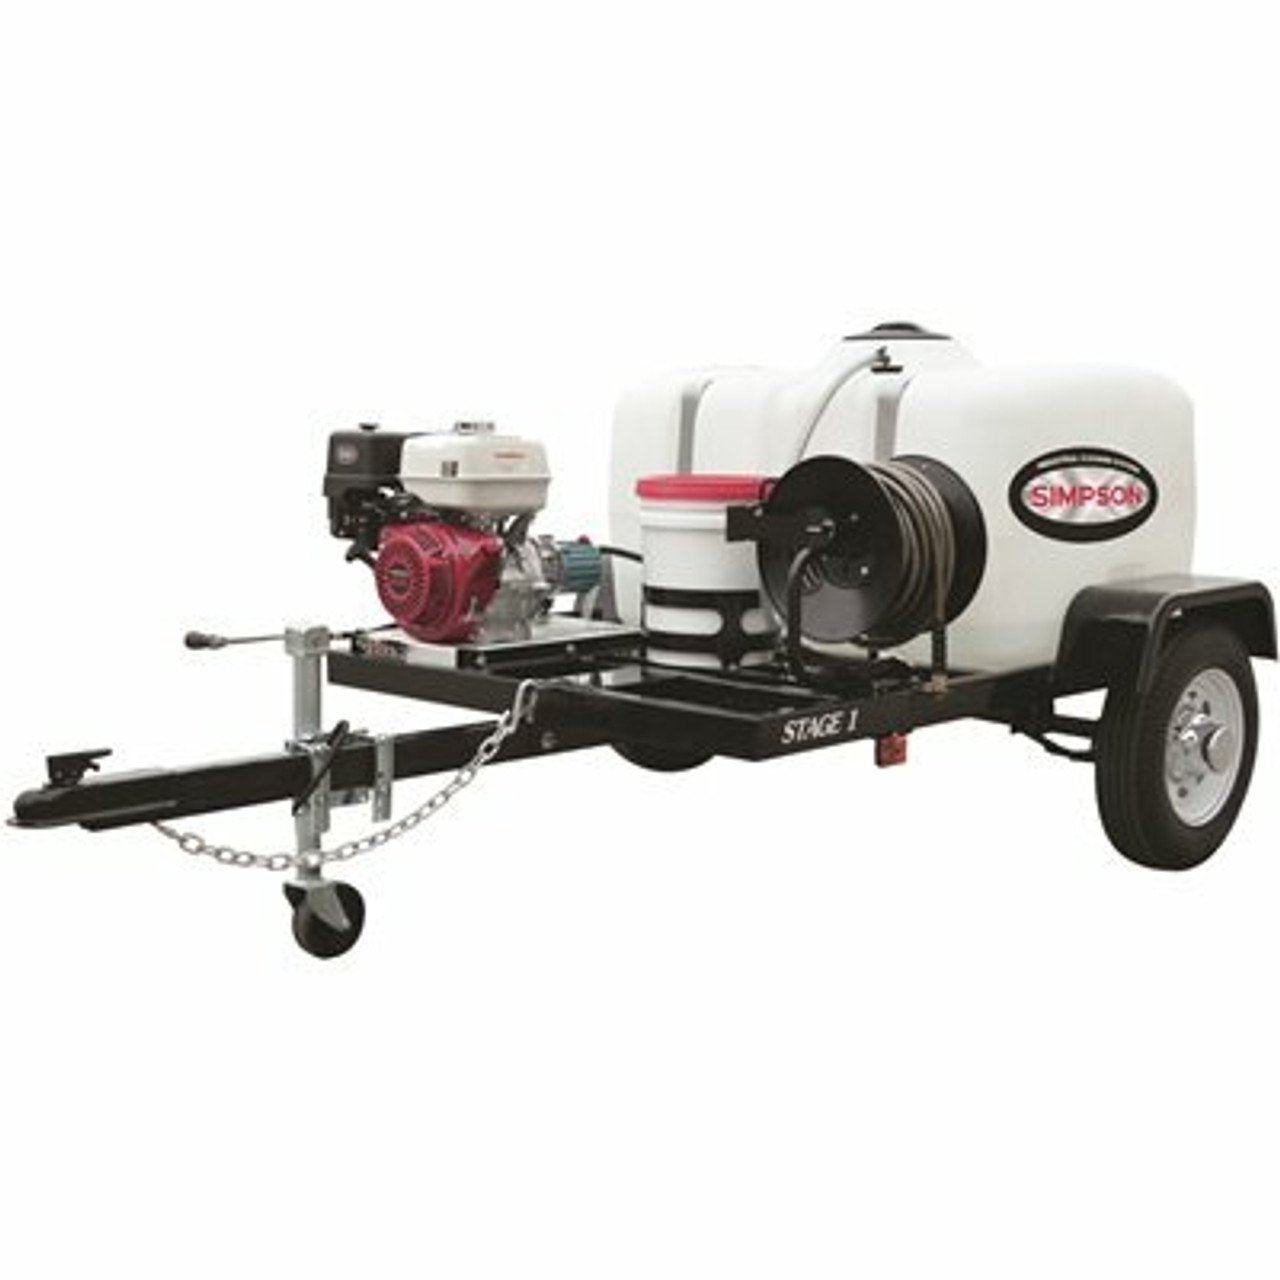 95002 4200 Psi At 4.0 Gpm With Honda Gx390 Cat Triplex Plunger Pump Cold Water Professional Gas Pressure Washer Trailer